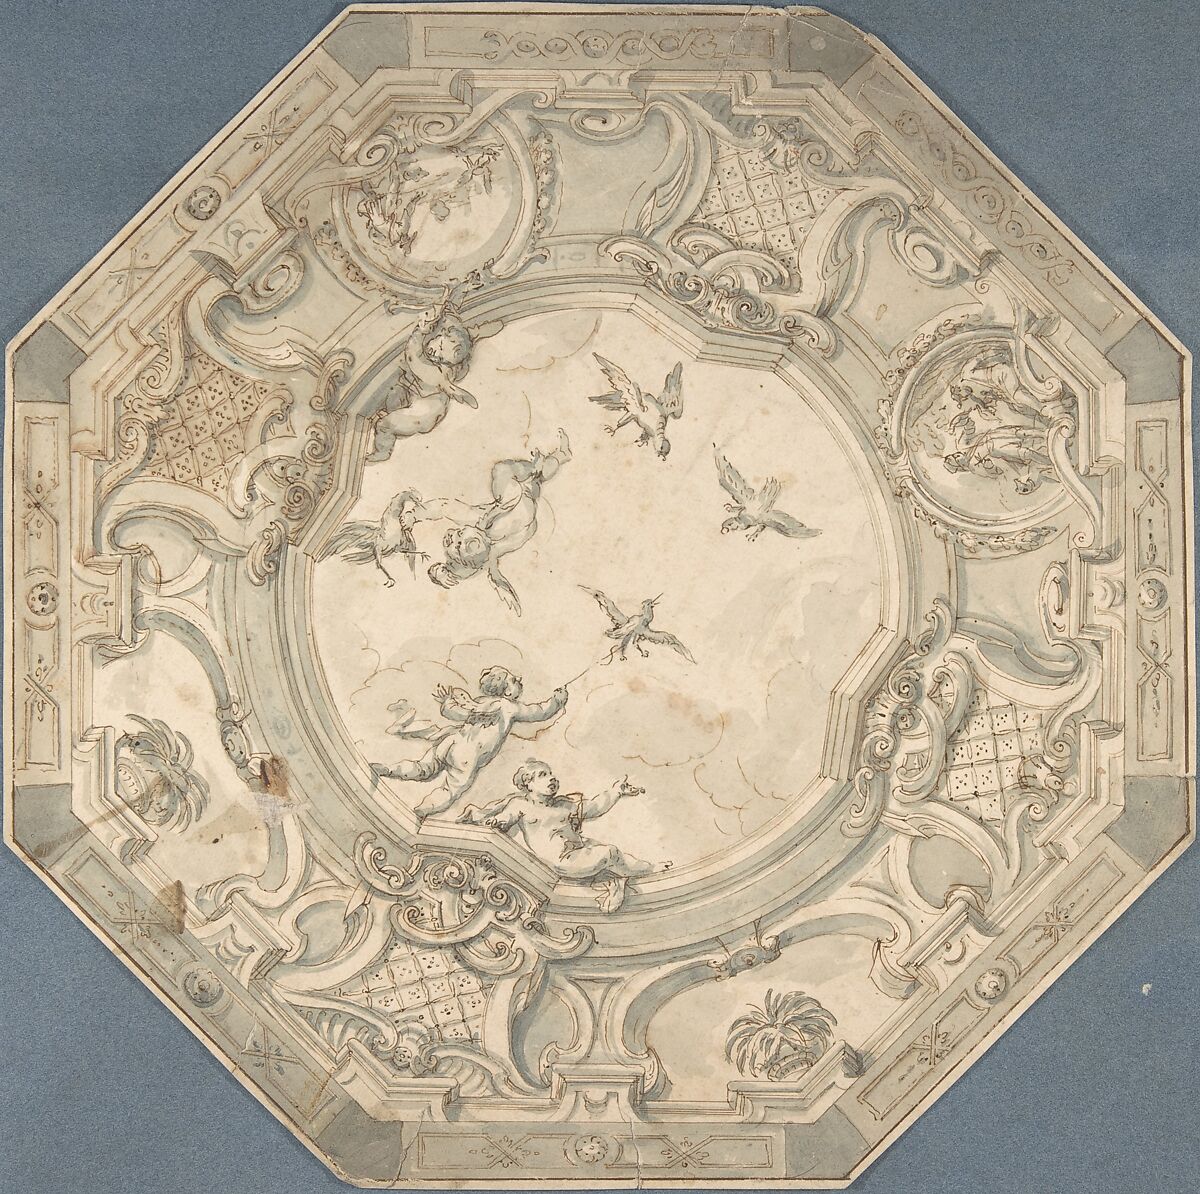 Octagonal Ceiling Design with Putti and Birds, Anonymous, Dutch, 18th century, Pen and brown ink, brush and blue wash. Framing line in pen and brown ink. 